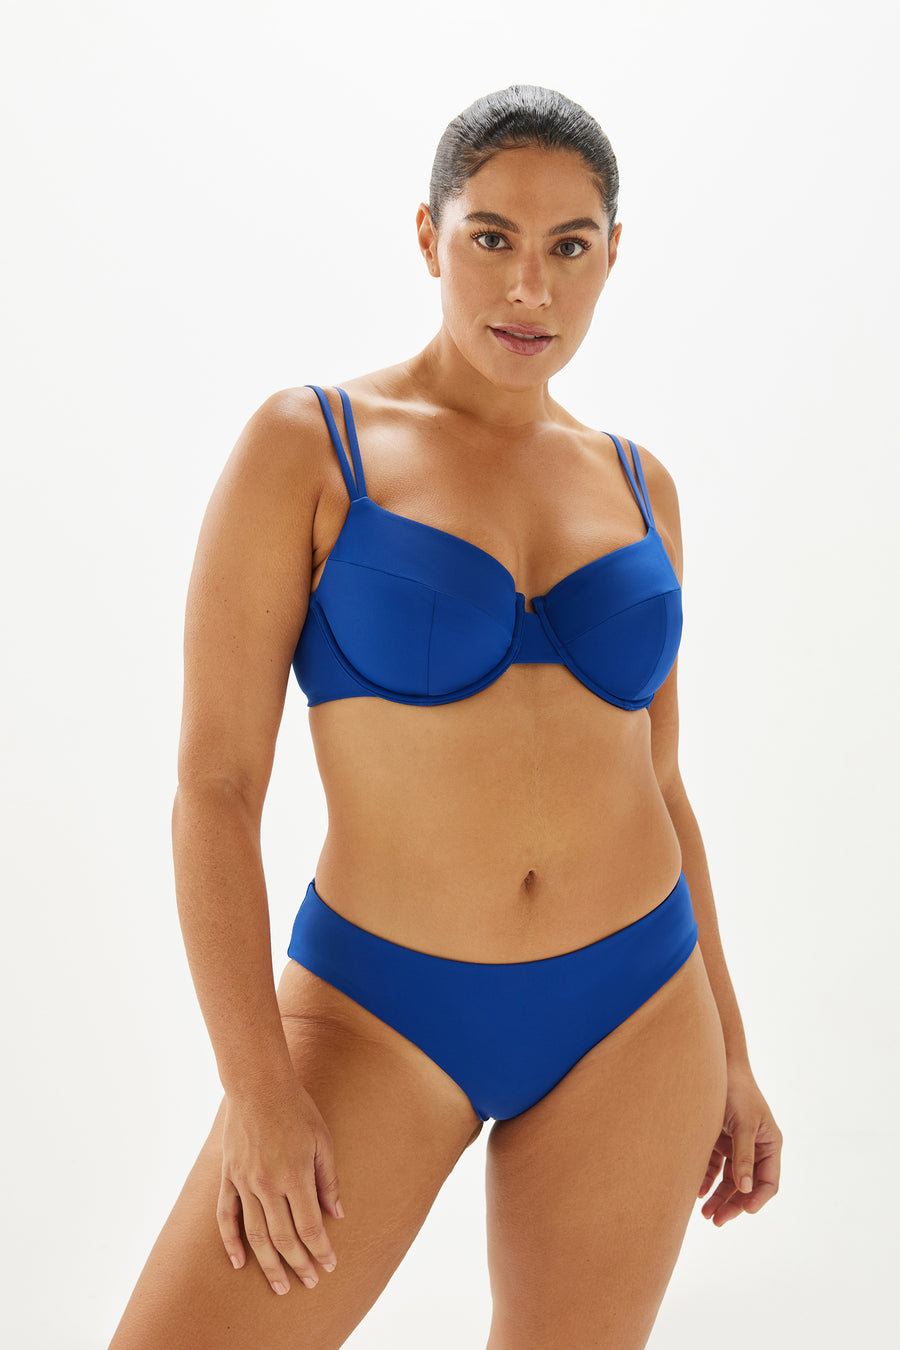 Form and Fold, D-g The Triangle Recycled Underwired Bikini Top, Blue, 32D,34D,36D,38D,32DD,34DD,36DD,38DD,30E,32E,34E,36E,38E,30F,32F,34F,36F,38F,30FF,32FF,34FF,36FF,30G,32G,34G, 36G